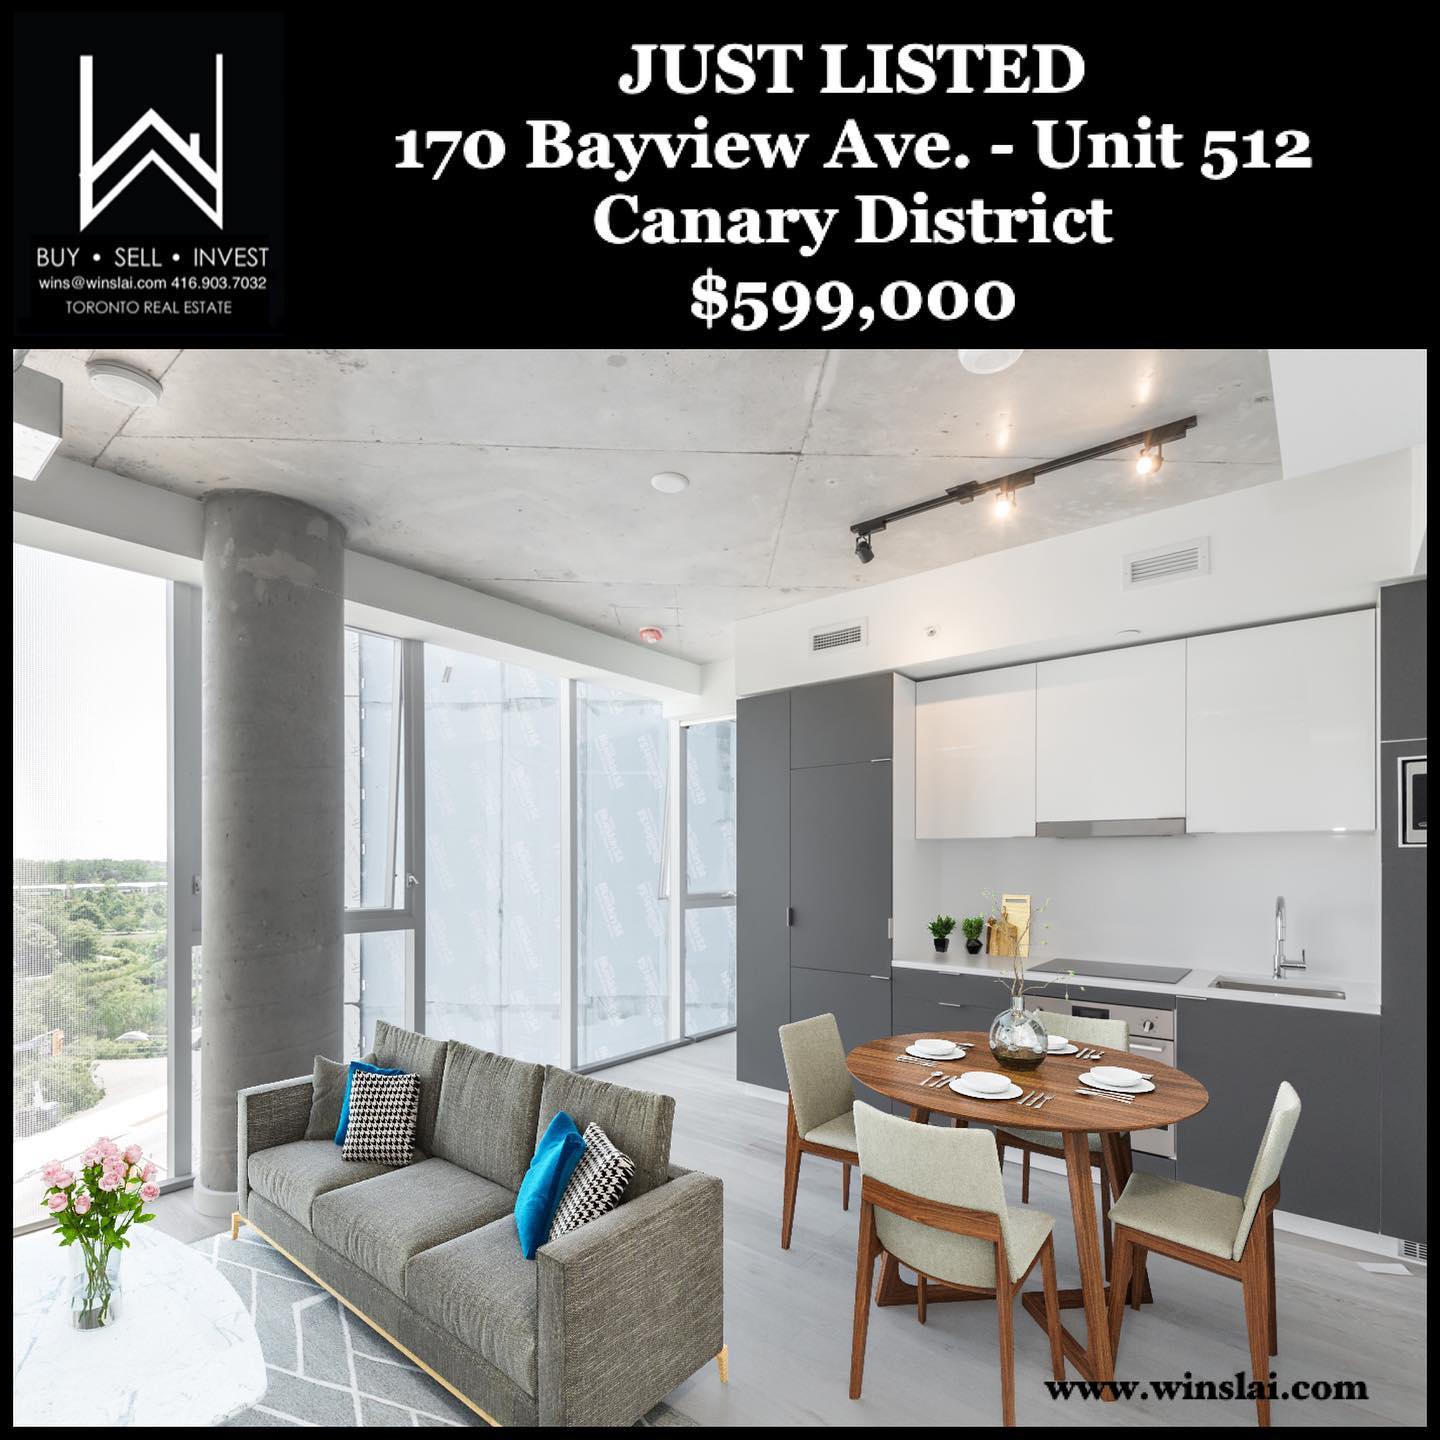 Just Listed flyer for condo.